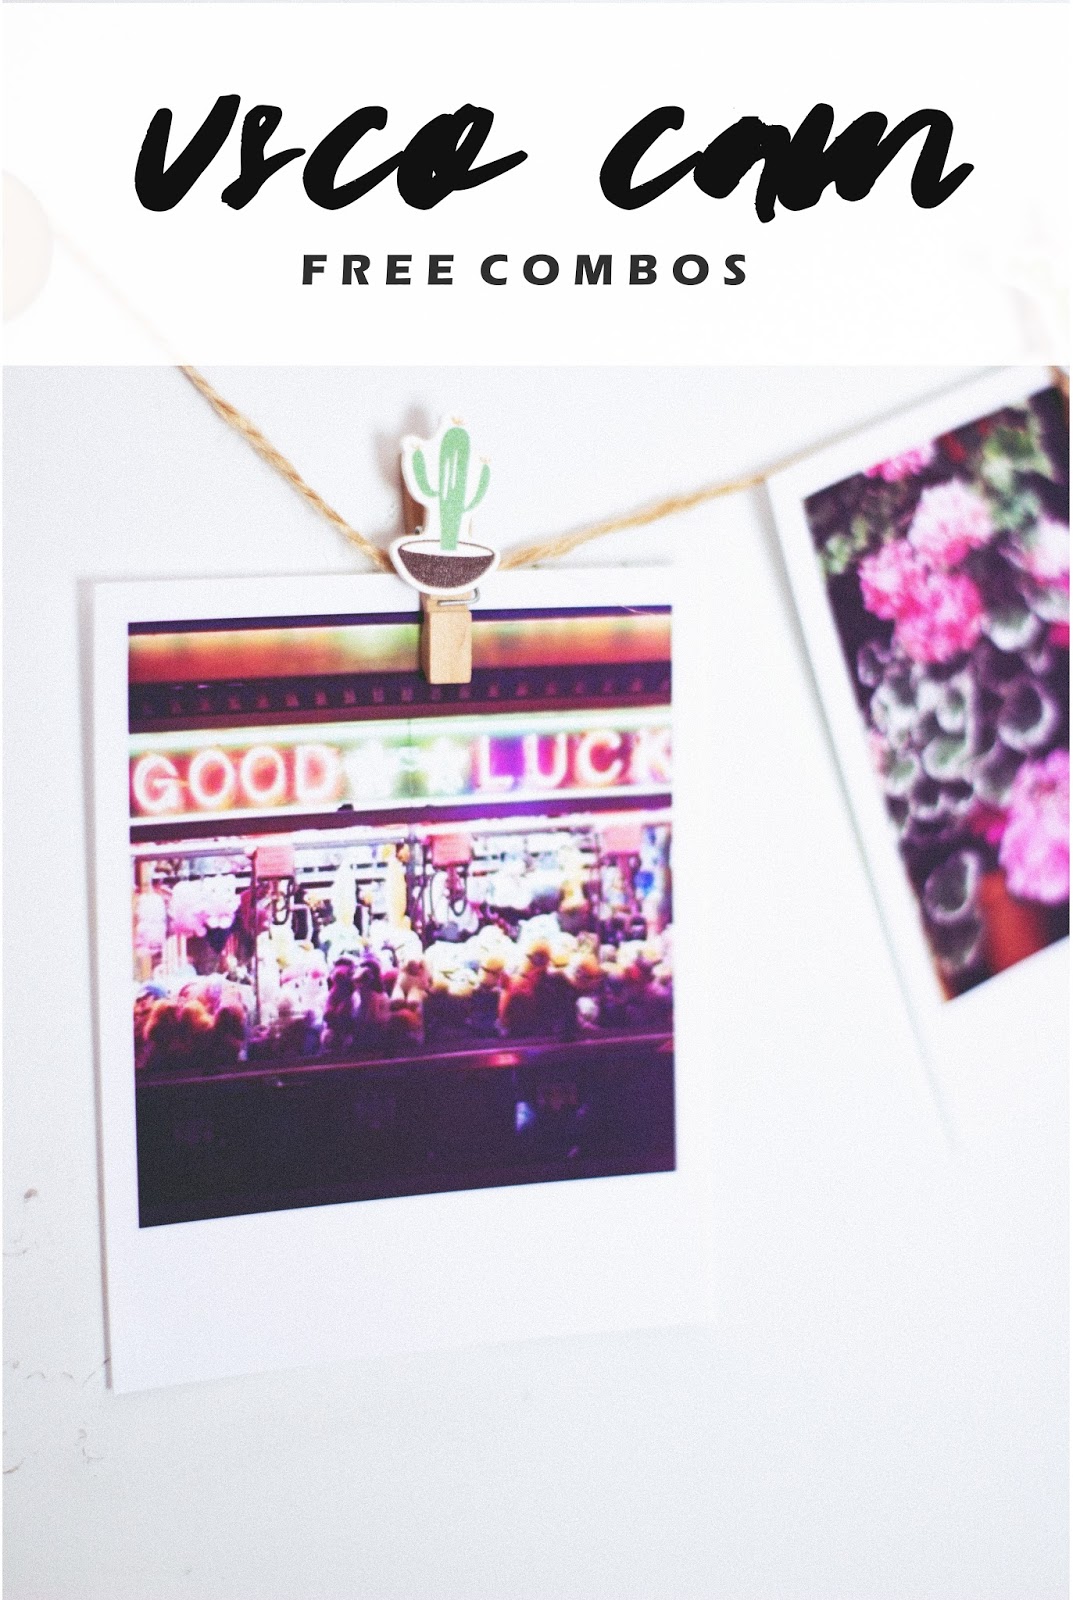 VSCOcam free combos!